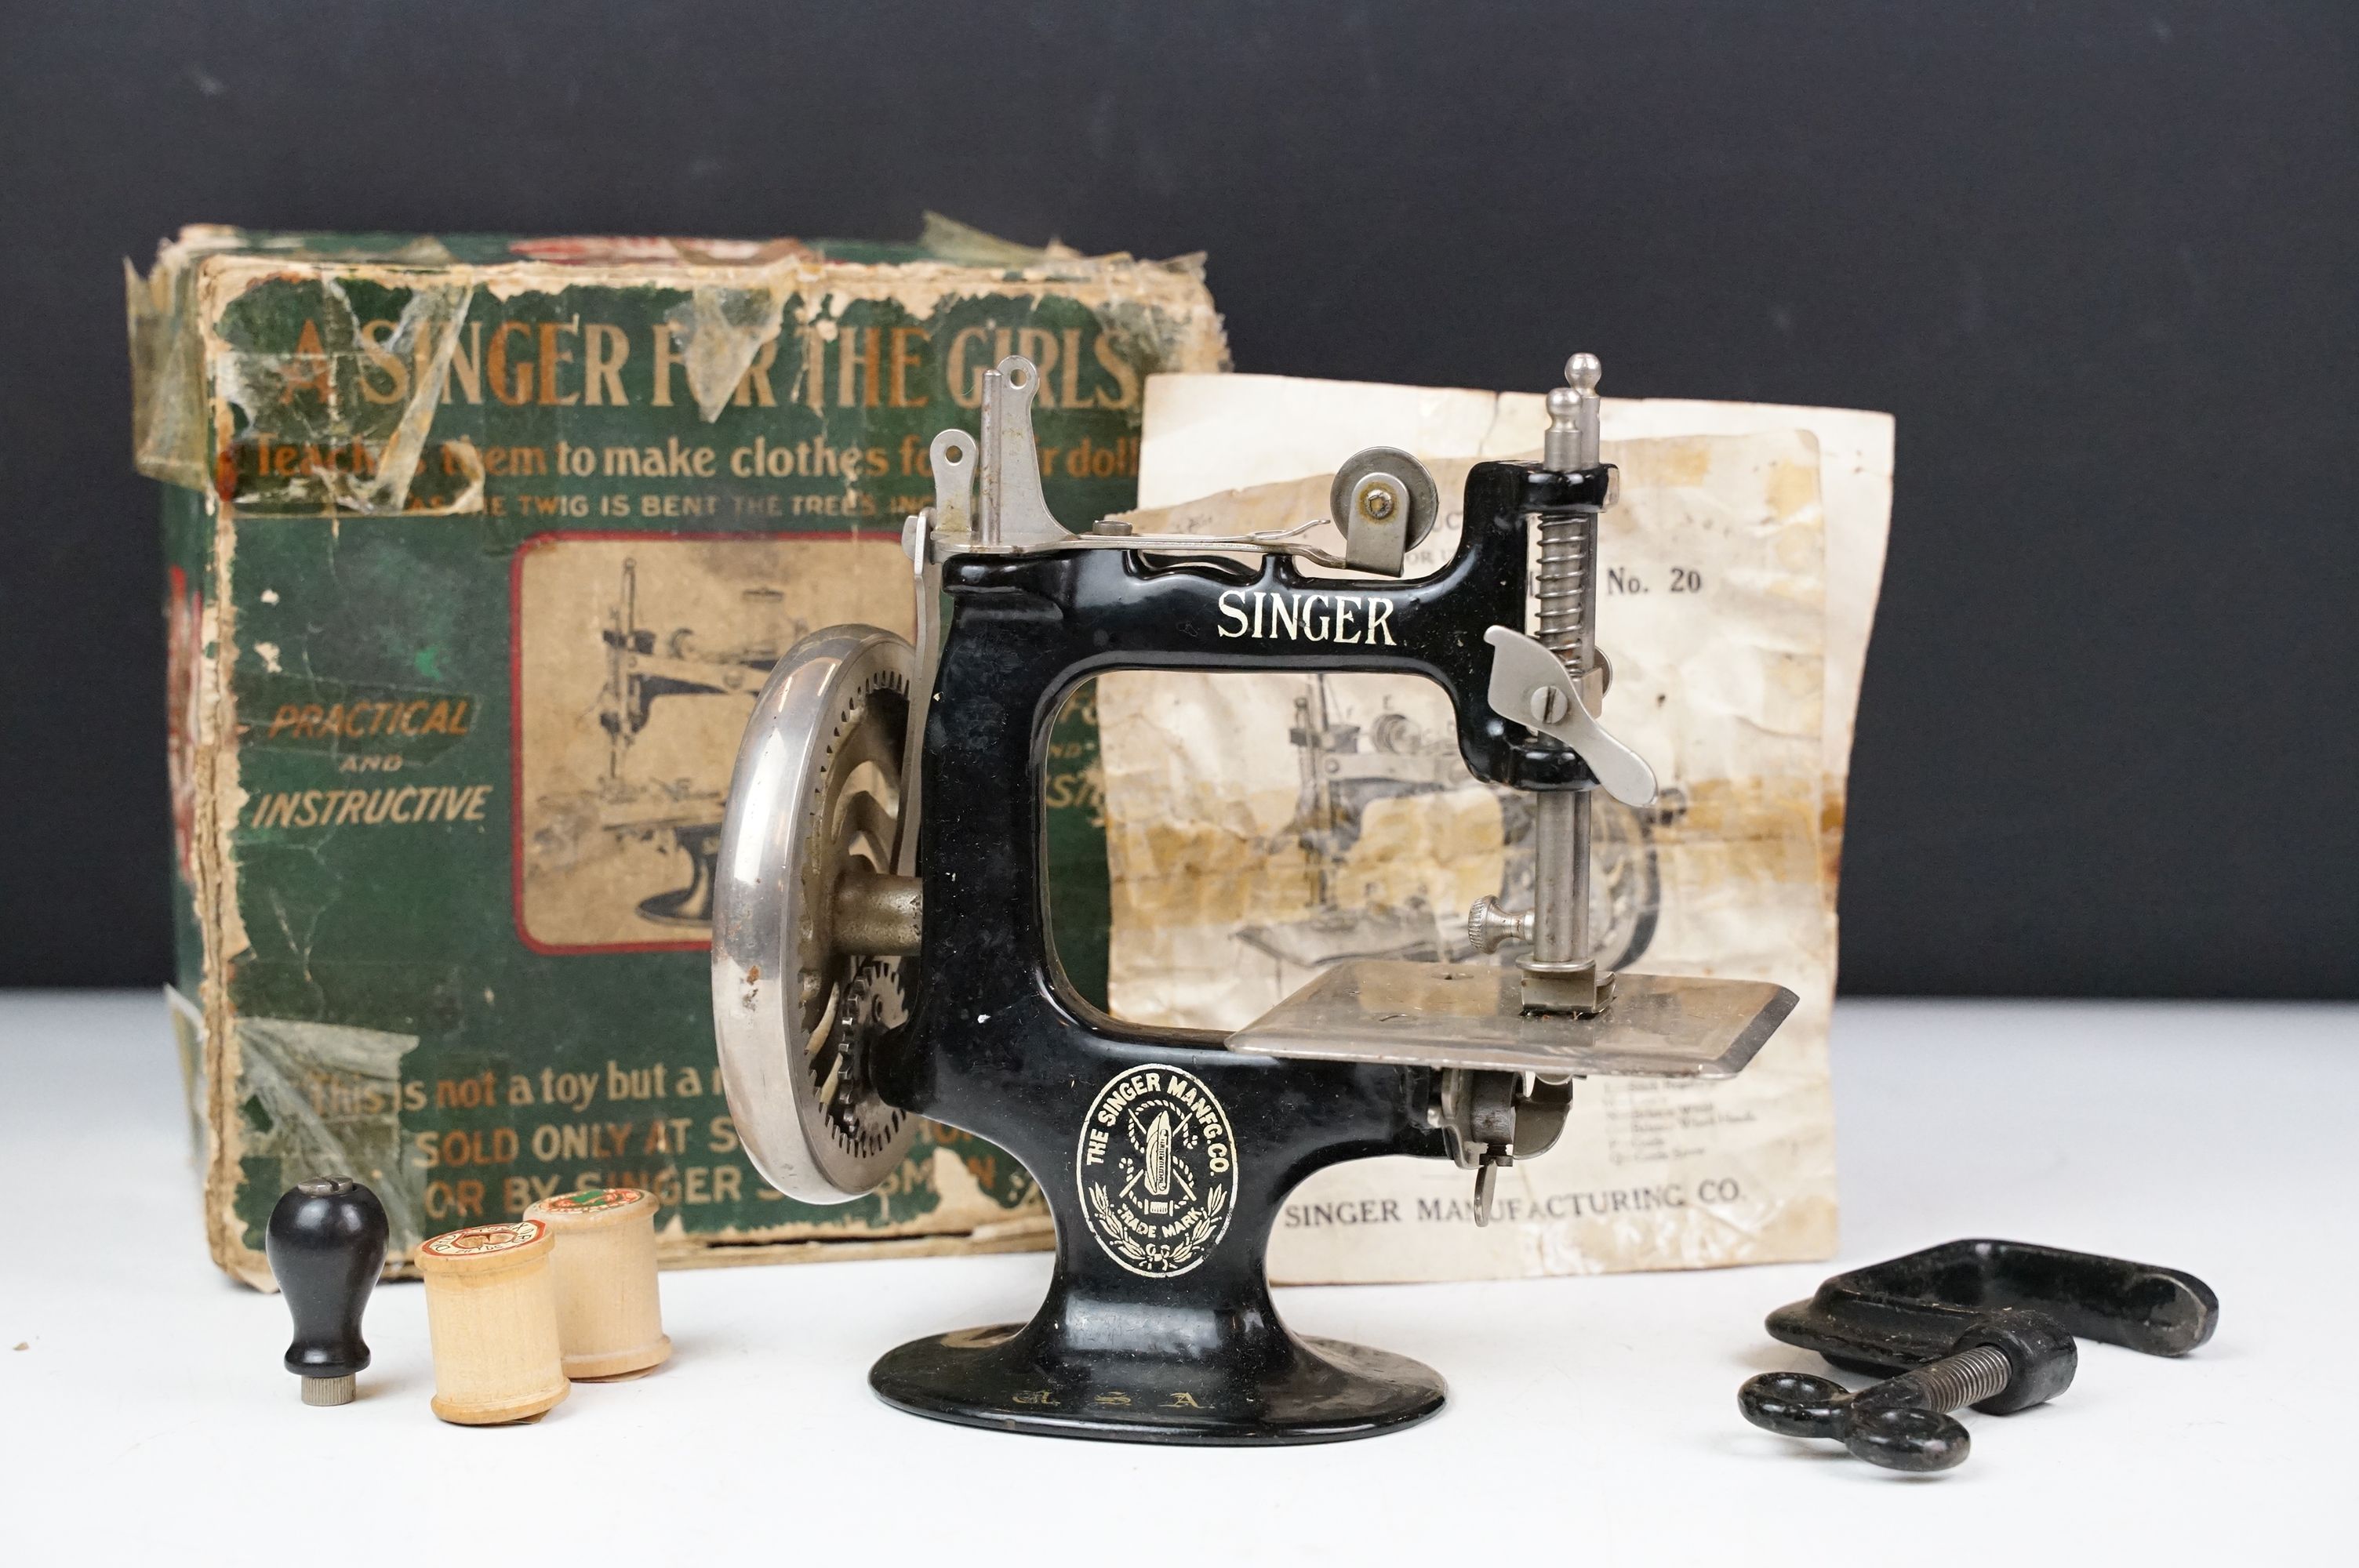 Early 20th century Miniature Singer Sewing Machine No. 20 with the original instruction leaflet